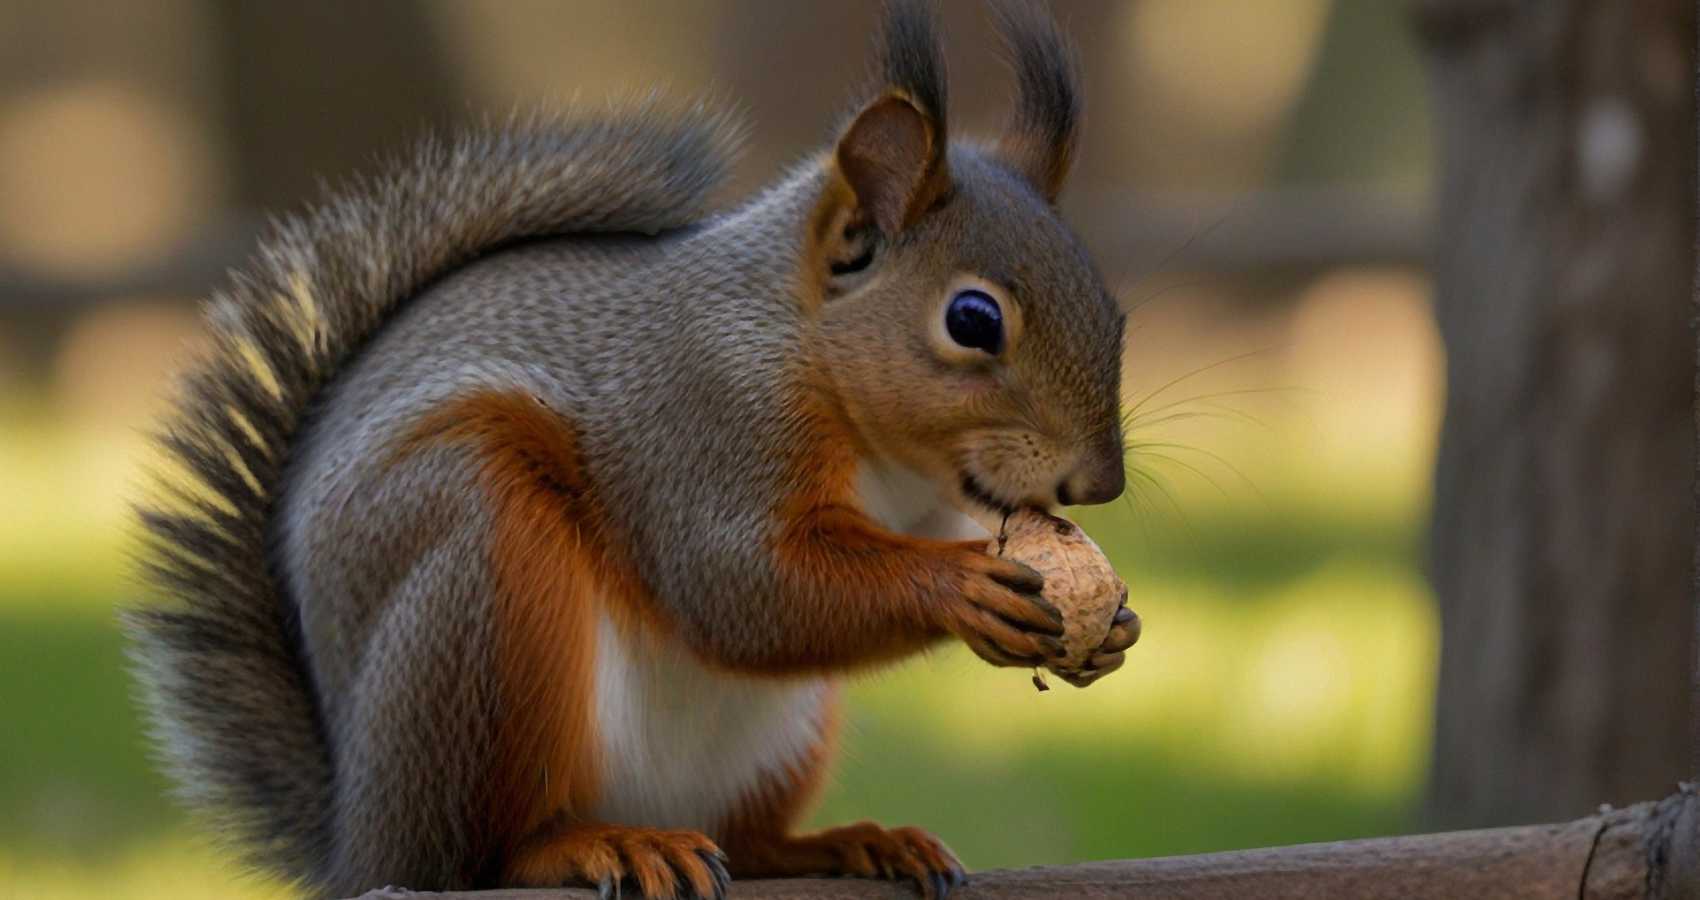 A Squirrel's Front Teeth Never Stop Growing, poetry by Barbara Harris Leonhard at Spillwords.com